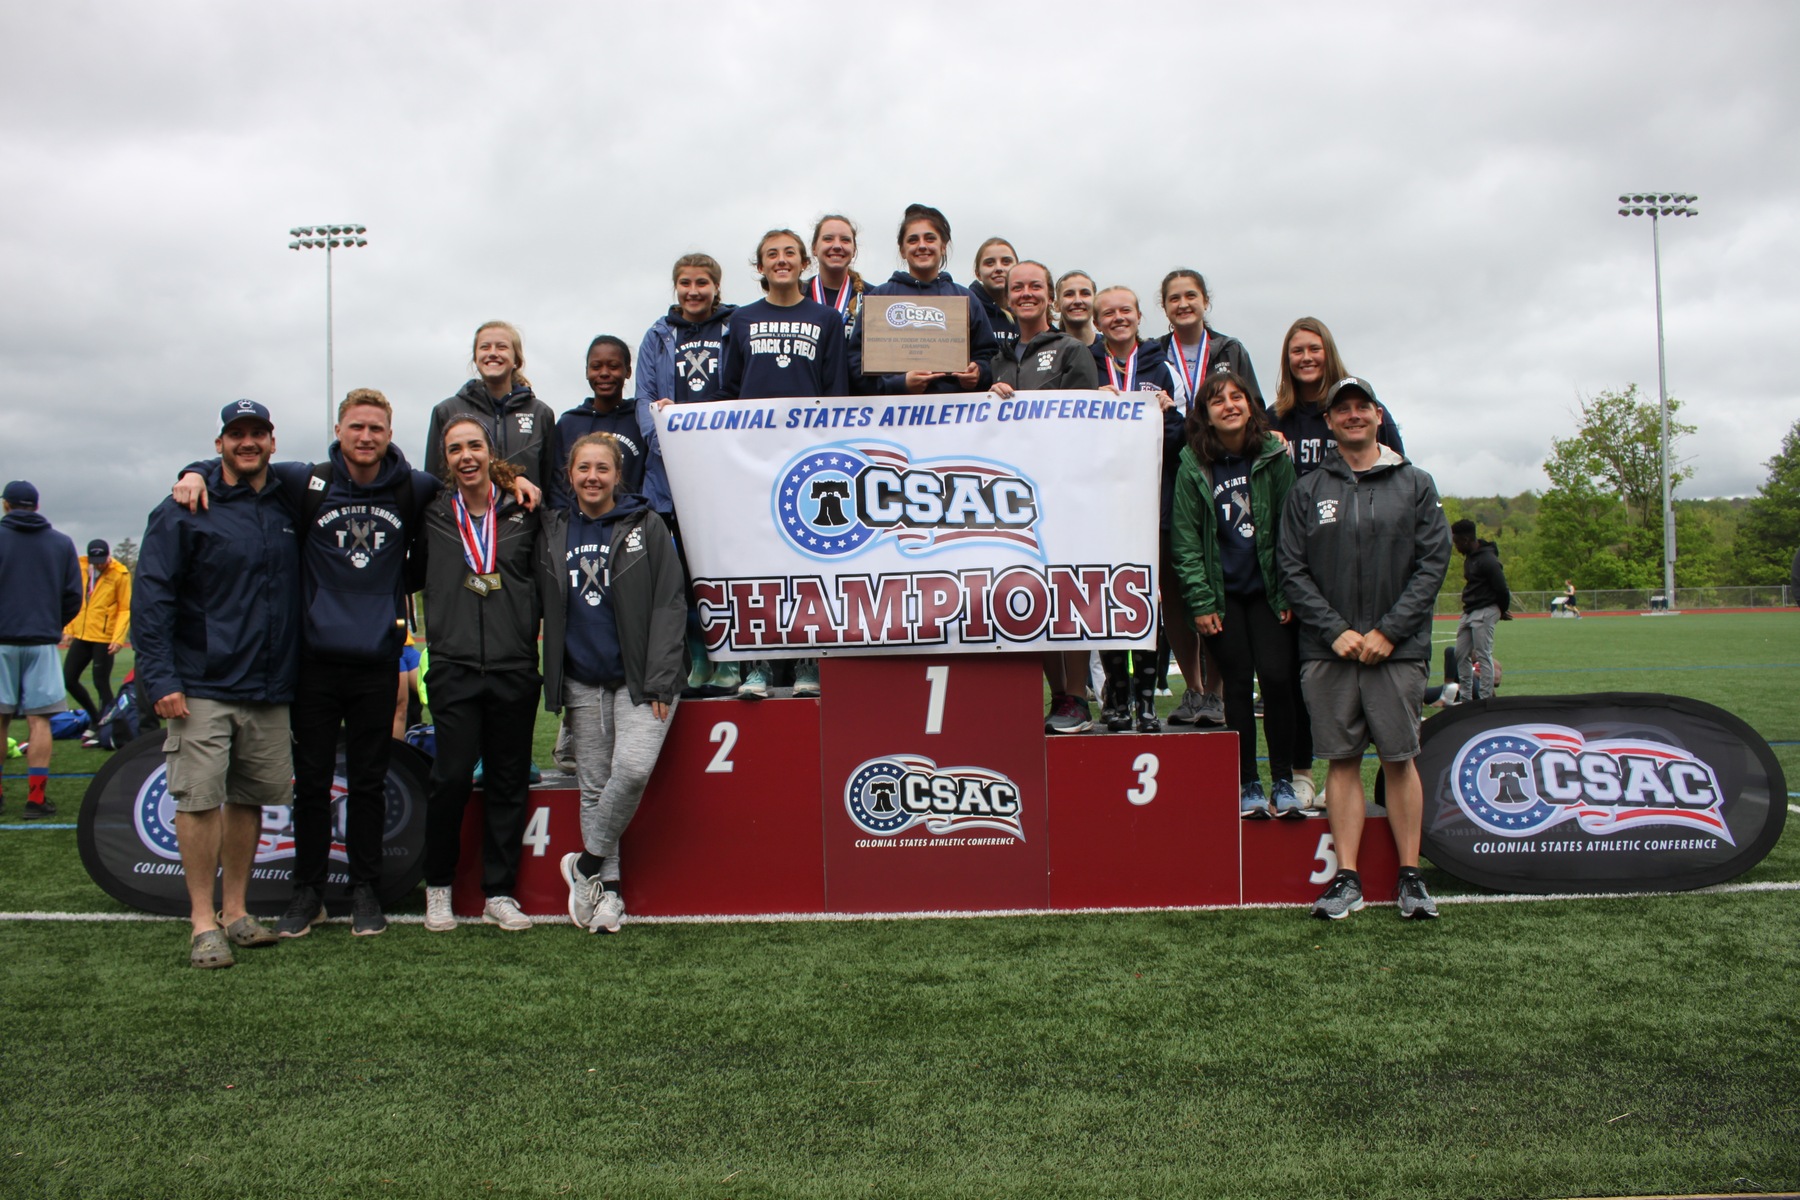 Lions Win CSAC Championship; Sargent and Yenchik Named Athletes of the Year